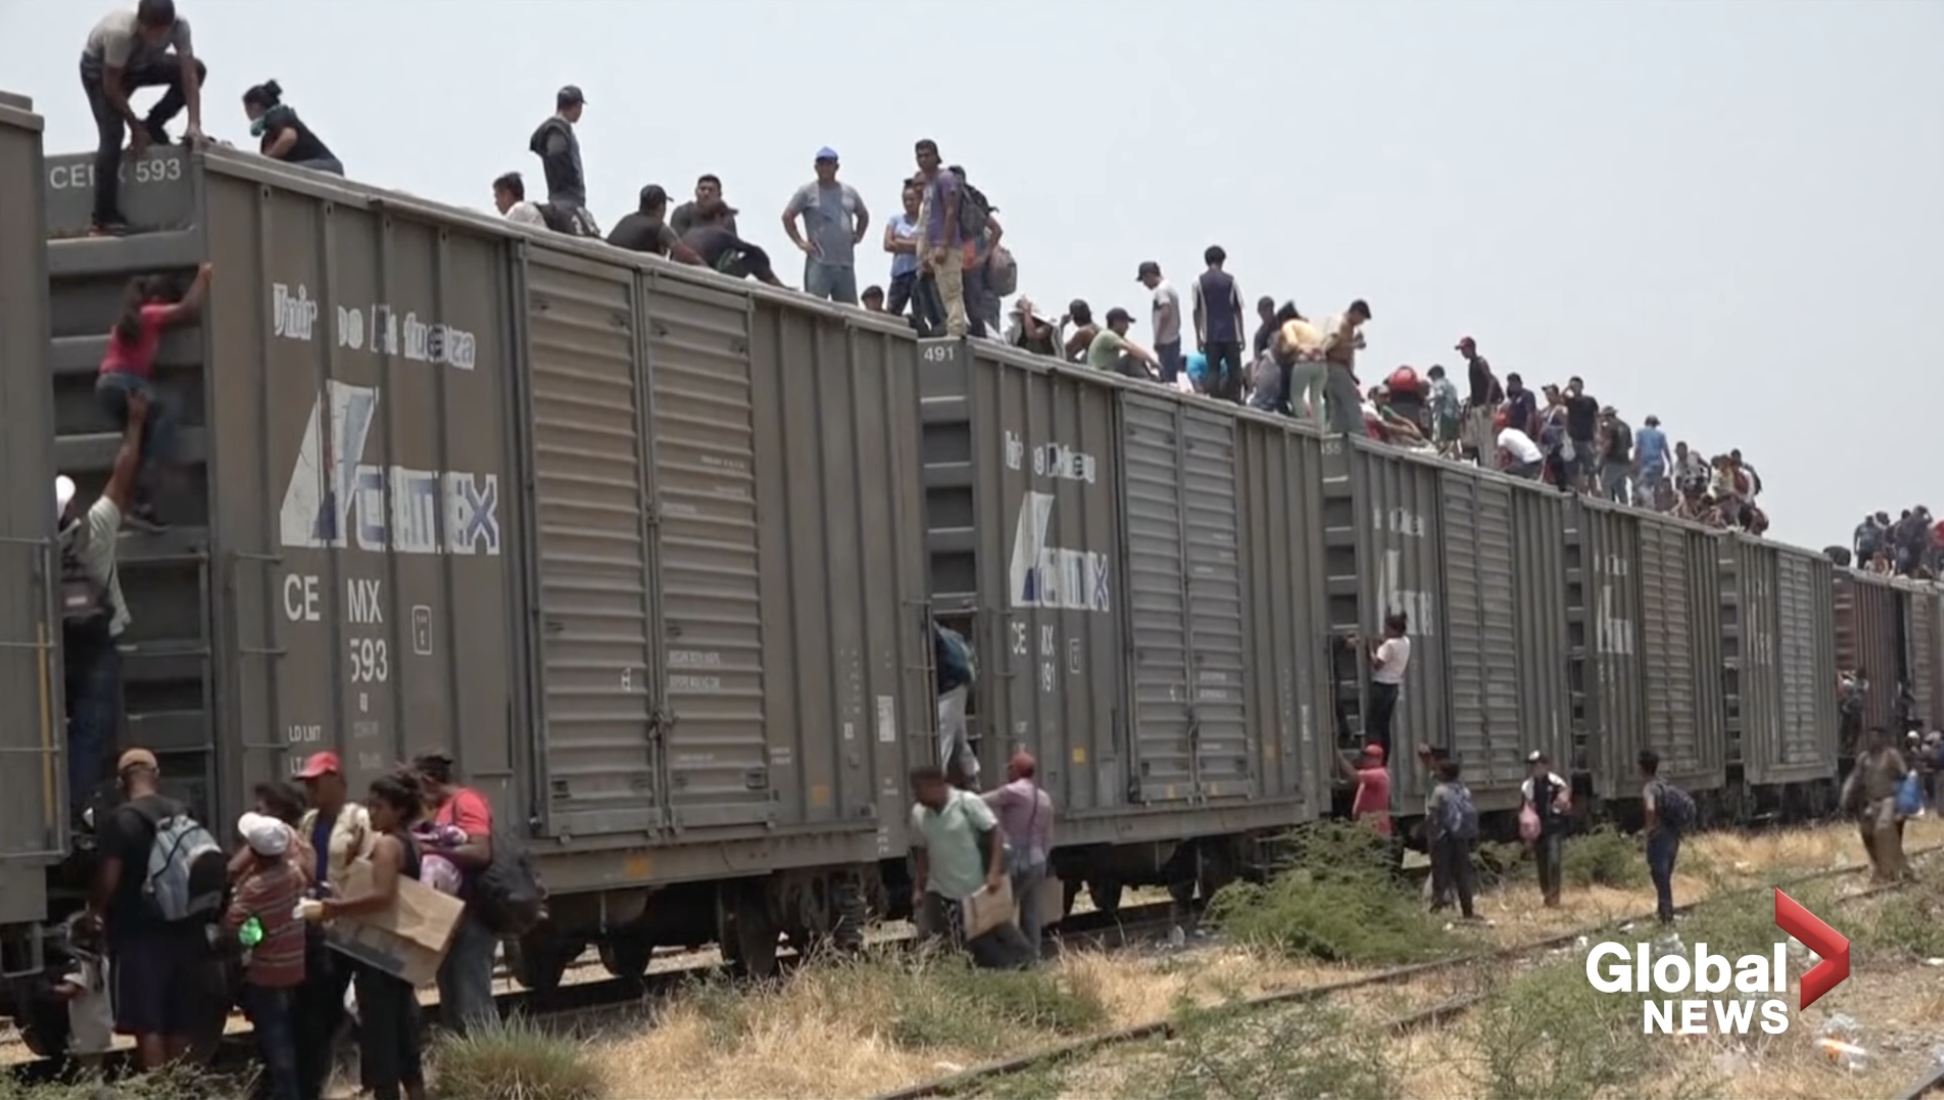 OBAMA'S AMERICA: They Are Building An Immigrant Army To Destroy The Republic From Inside